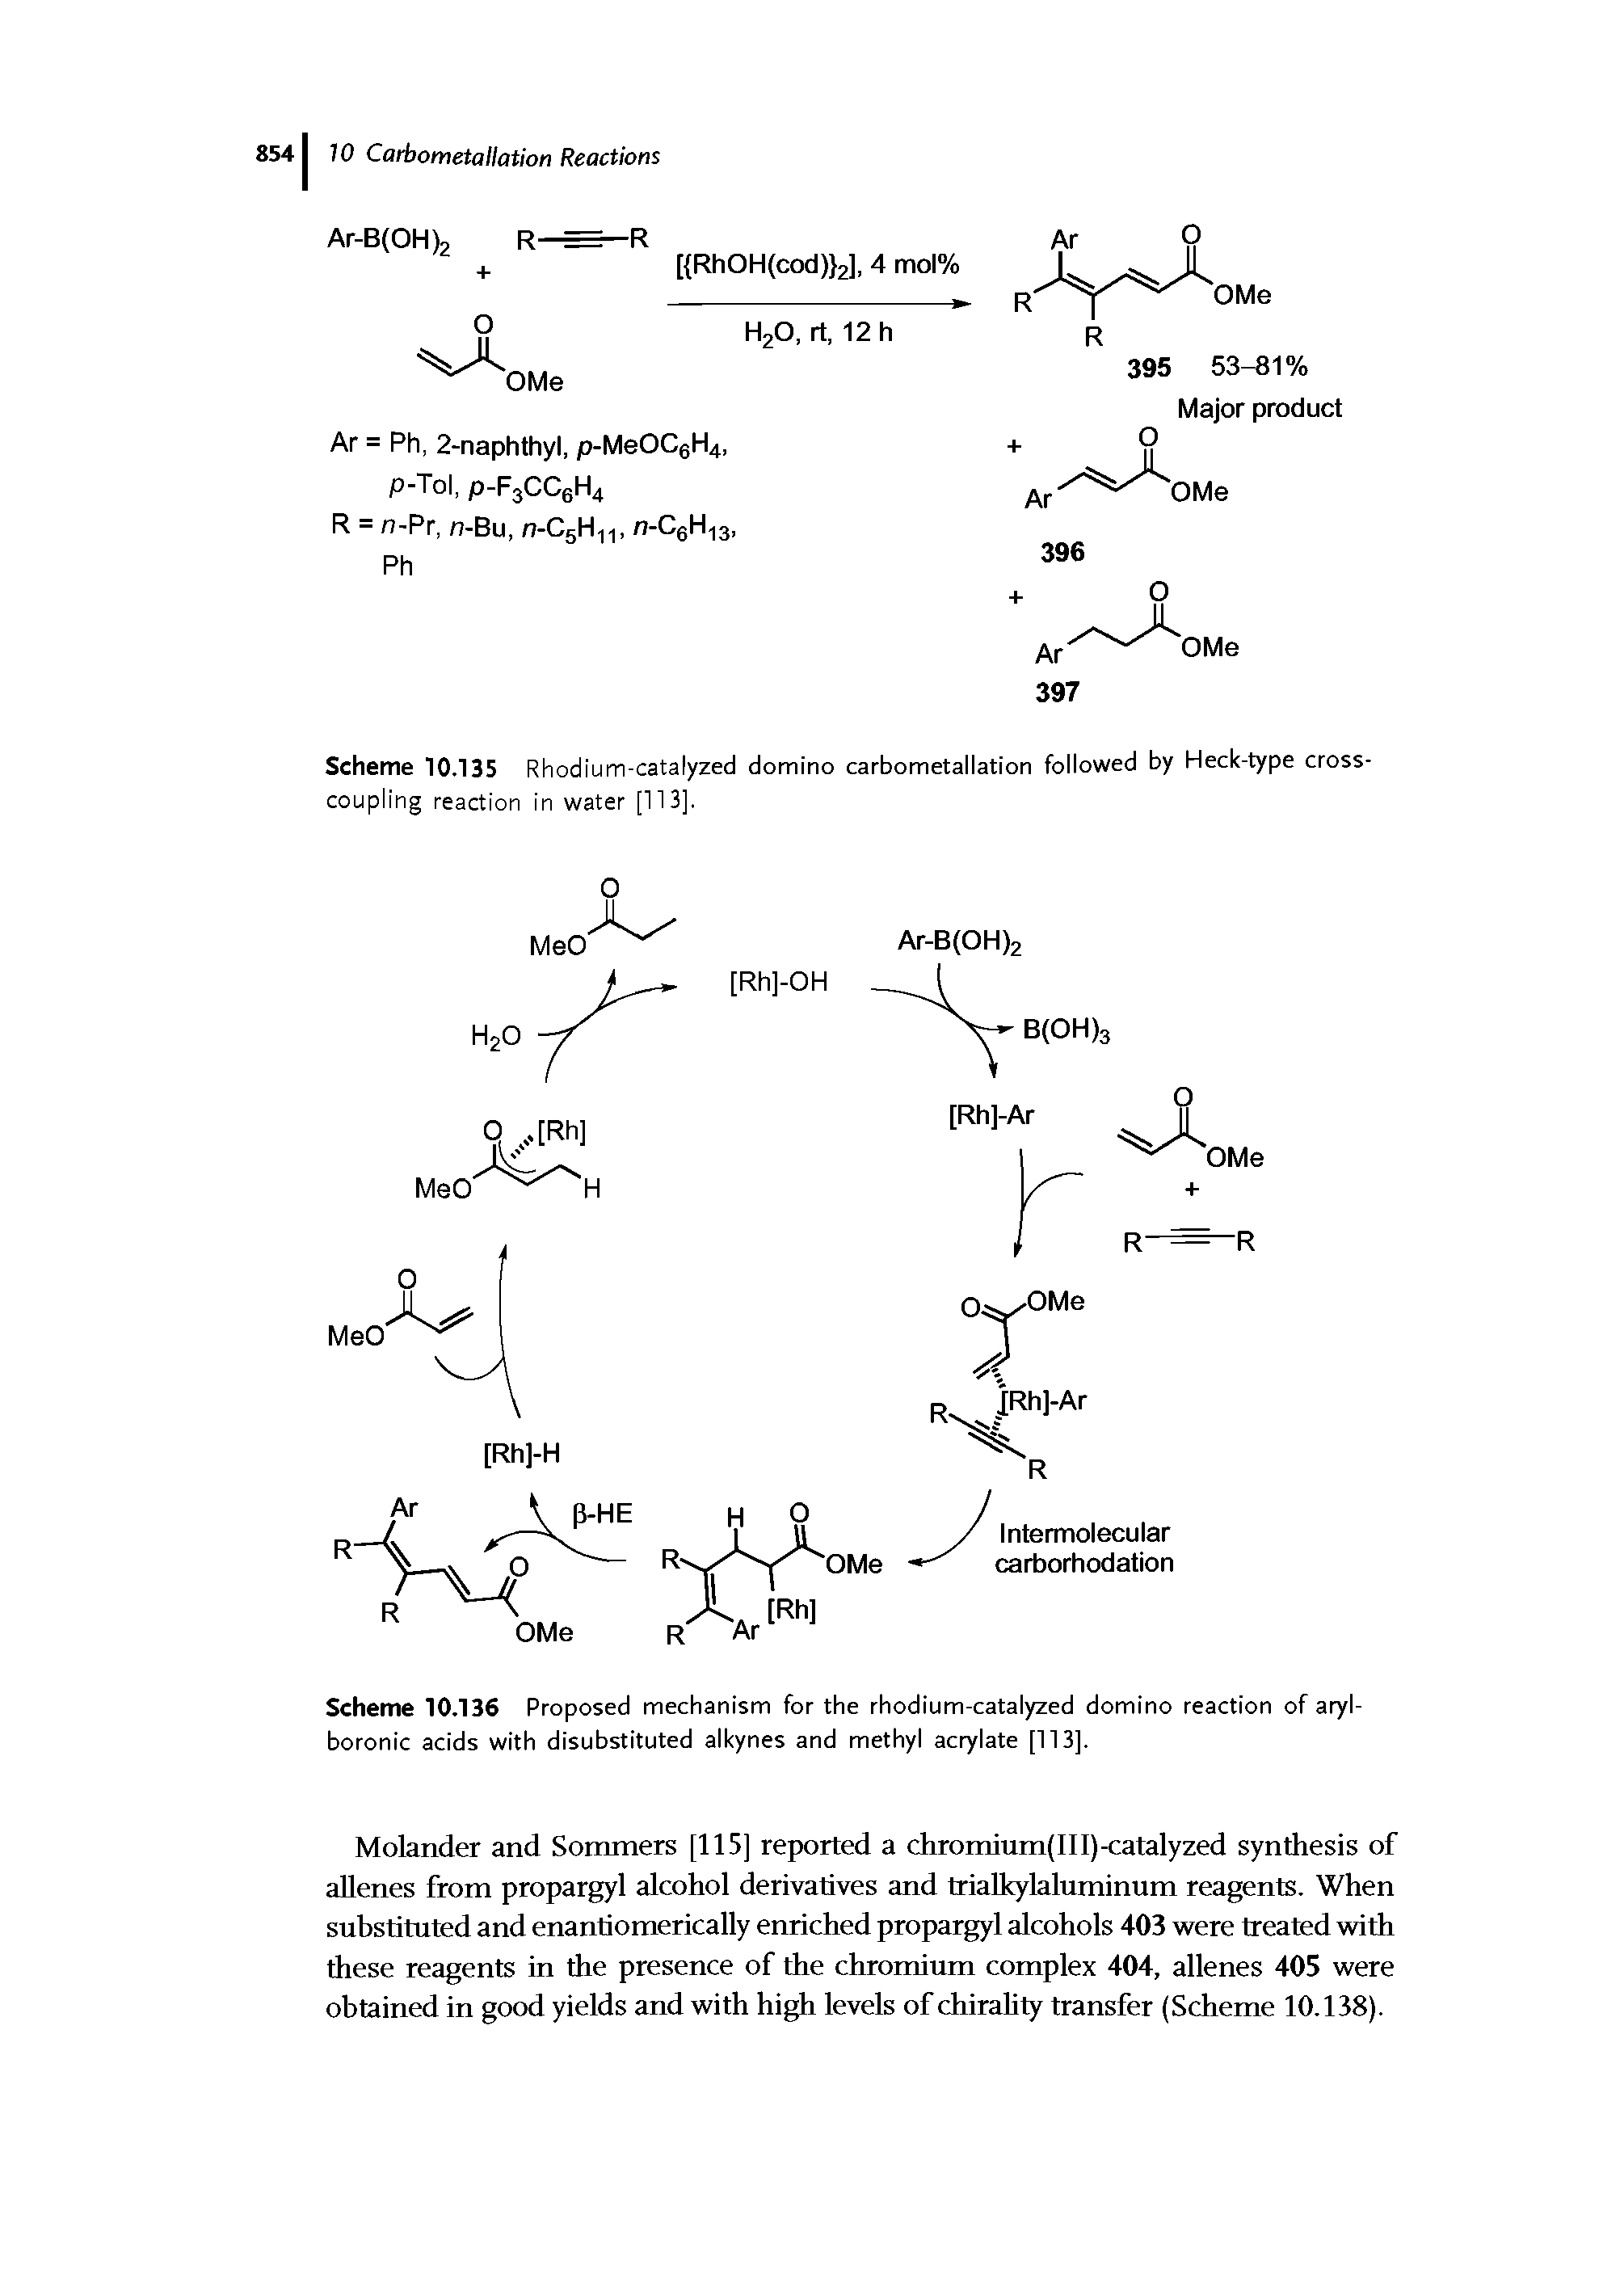 Scheme 10.136 Proposed mechanism for the rhodium-catalyzed domino reaction of aryl-boronic acids with disubstituted alkynes and methyl acrylate [113].